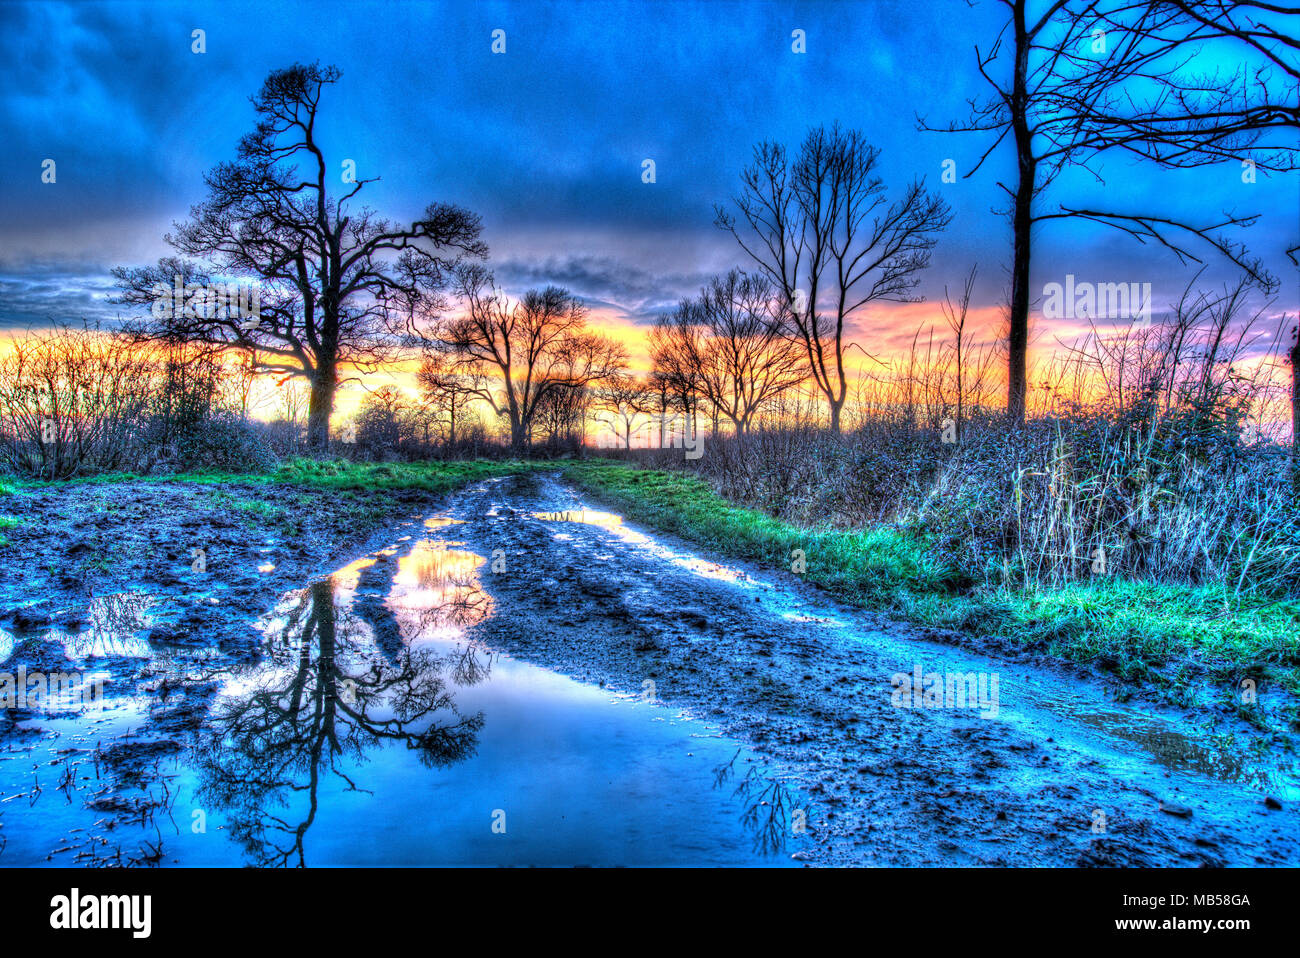 Village of Coddington, England. Artistic sunset view over a bridleway in rural Cheshire. Stock Photo